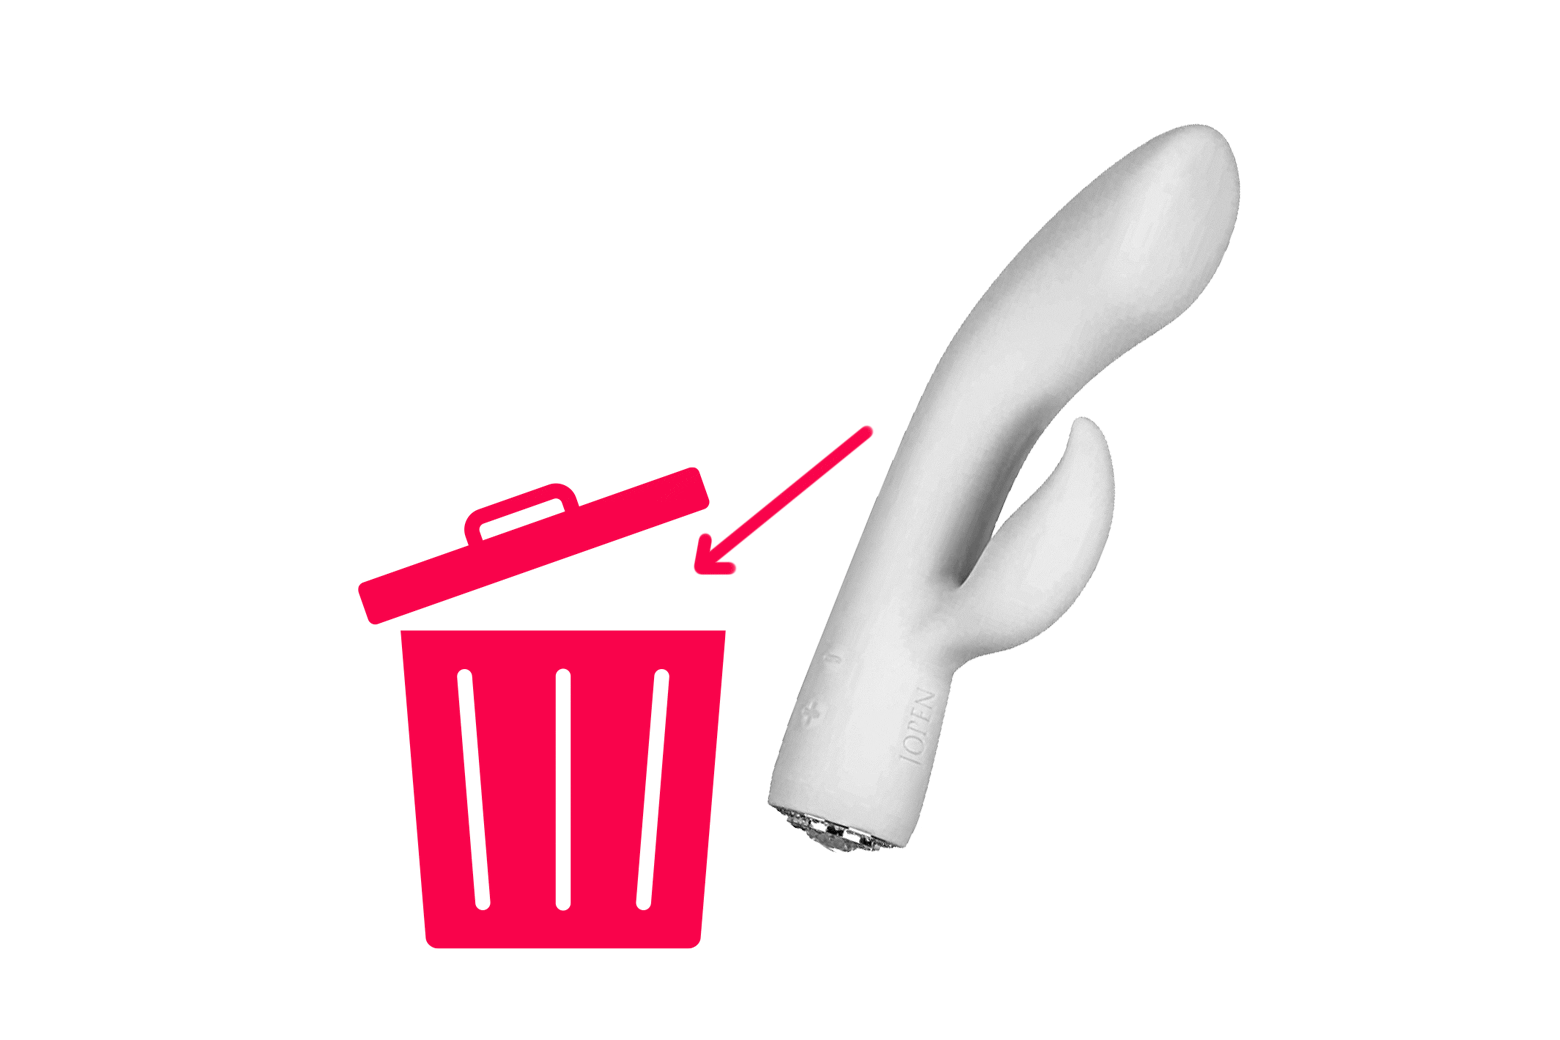 An illustrated arrow points an animated vibrator at a trash can.